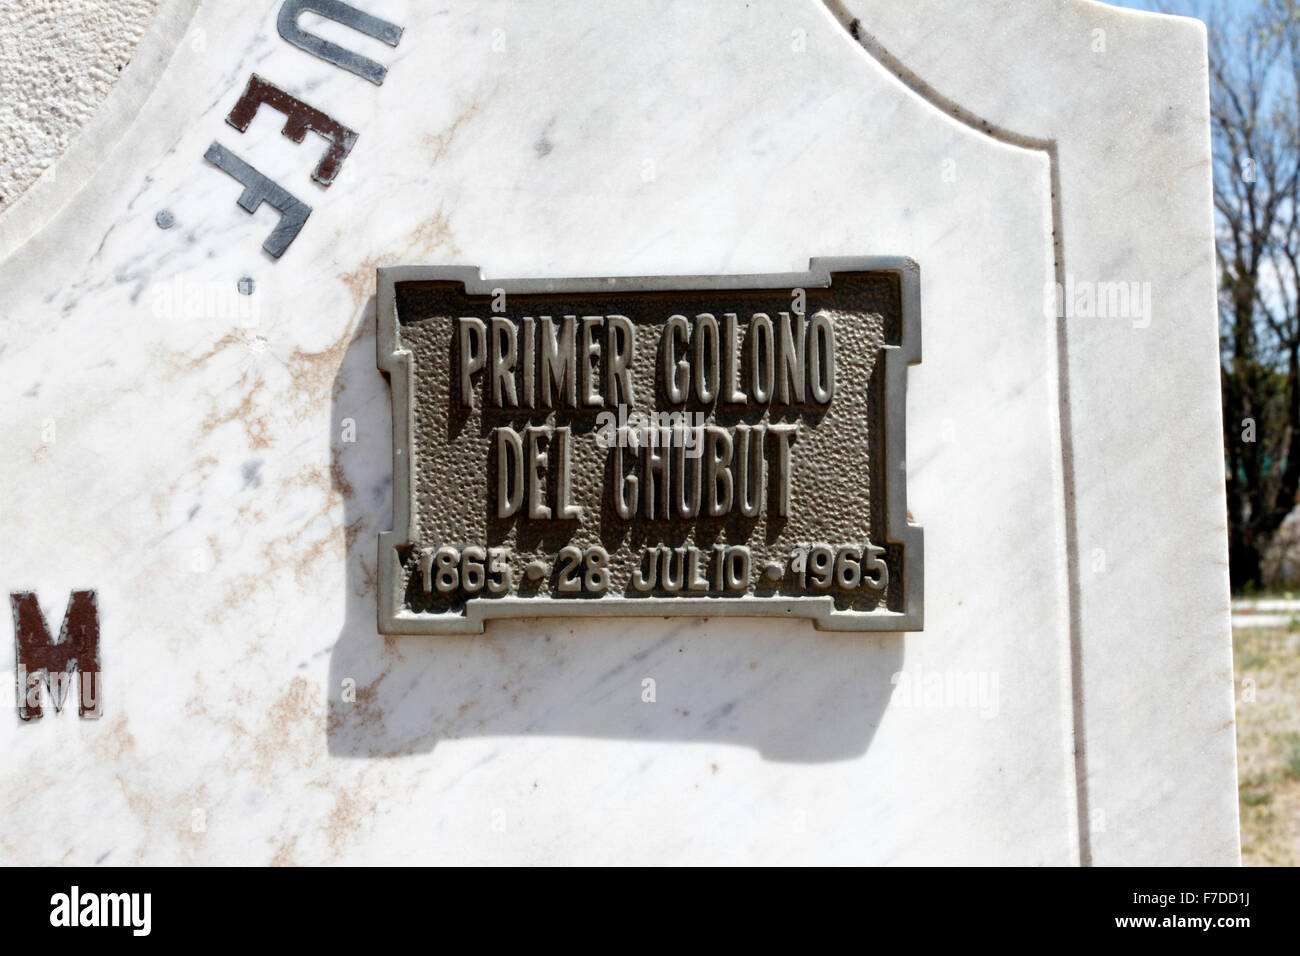 Primer colono del chubut. First colonist of Chubut plaque on a gravestone. Stock Photo